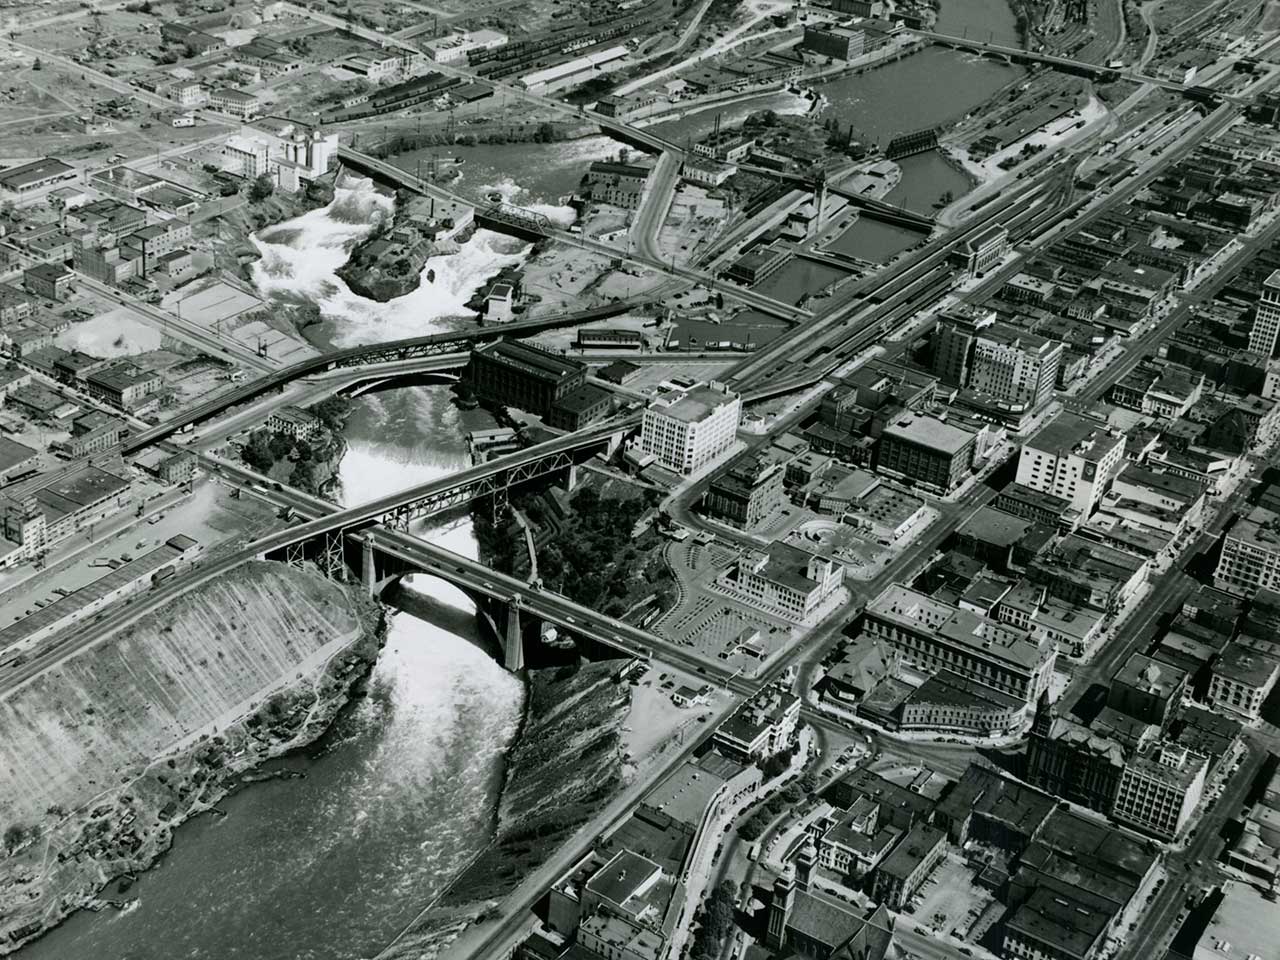 Black and white aerial photograph of downtown Spokane in the 1950s showing rail lines.